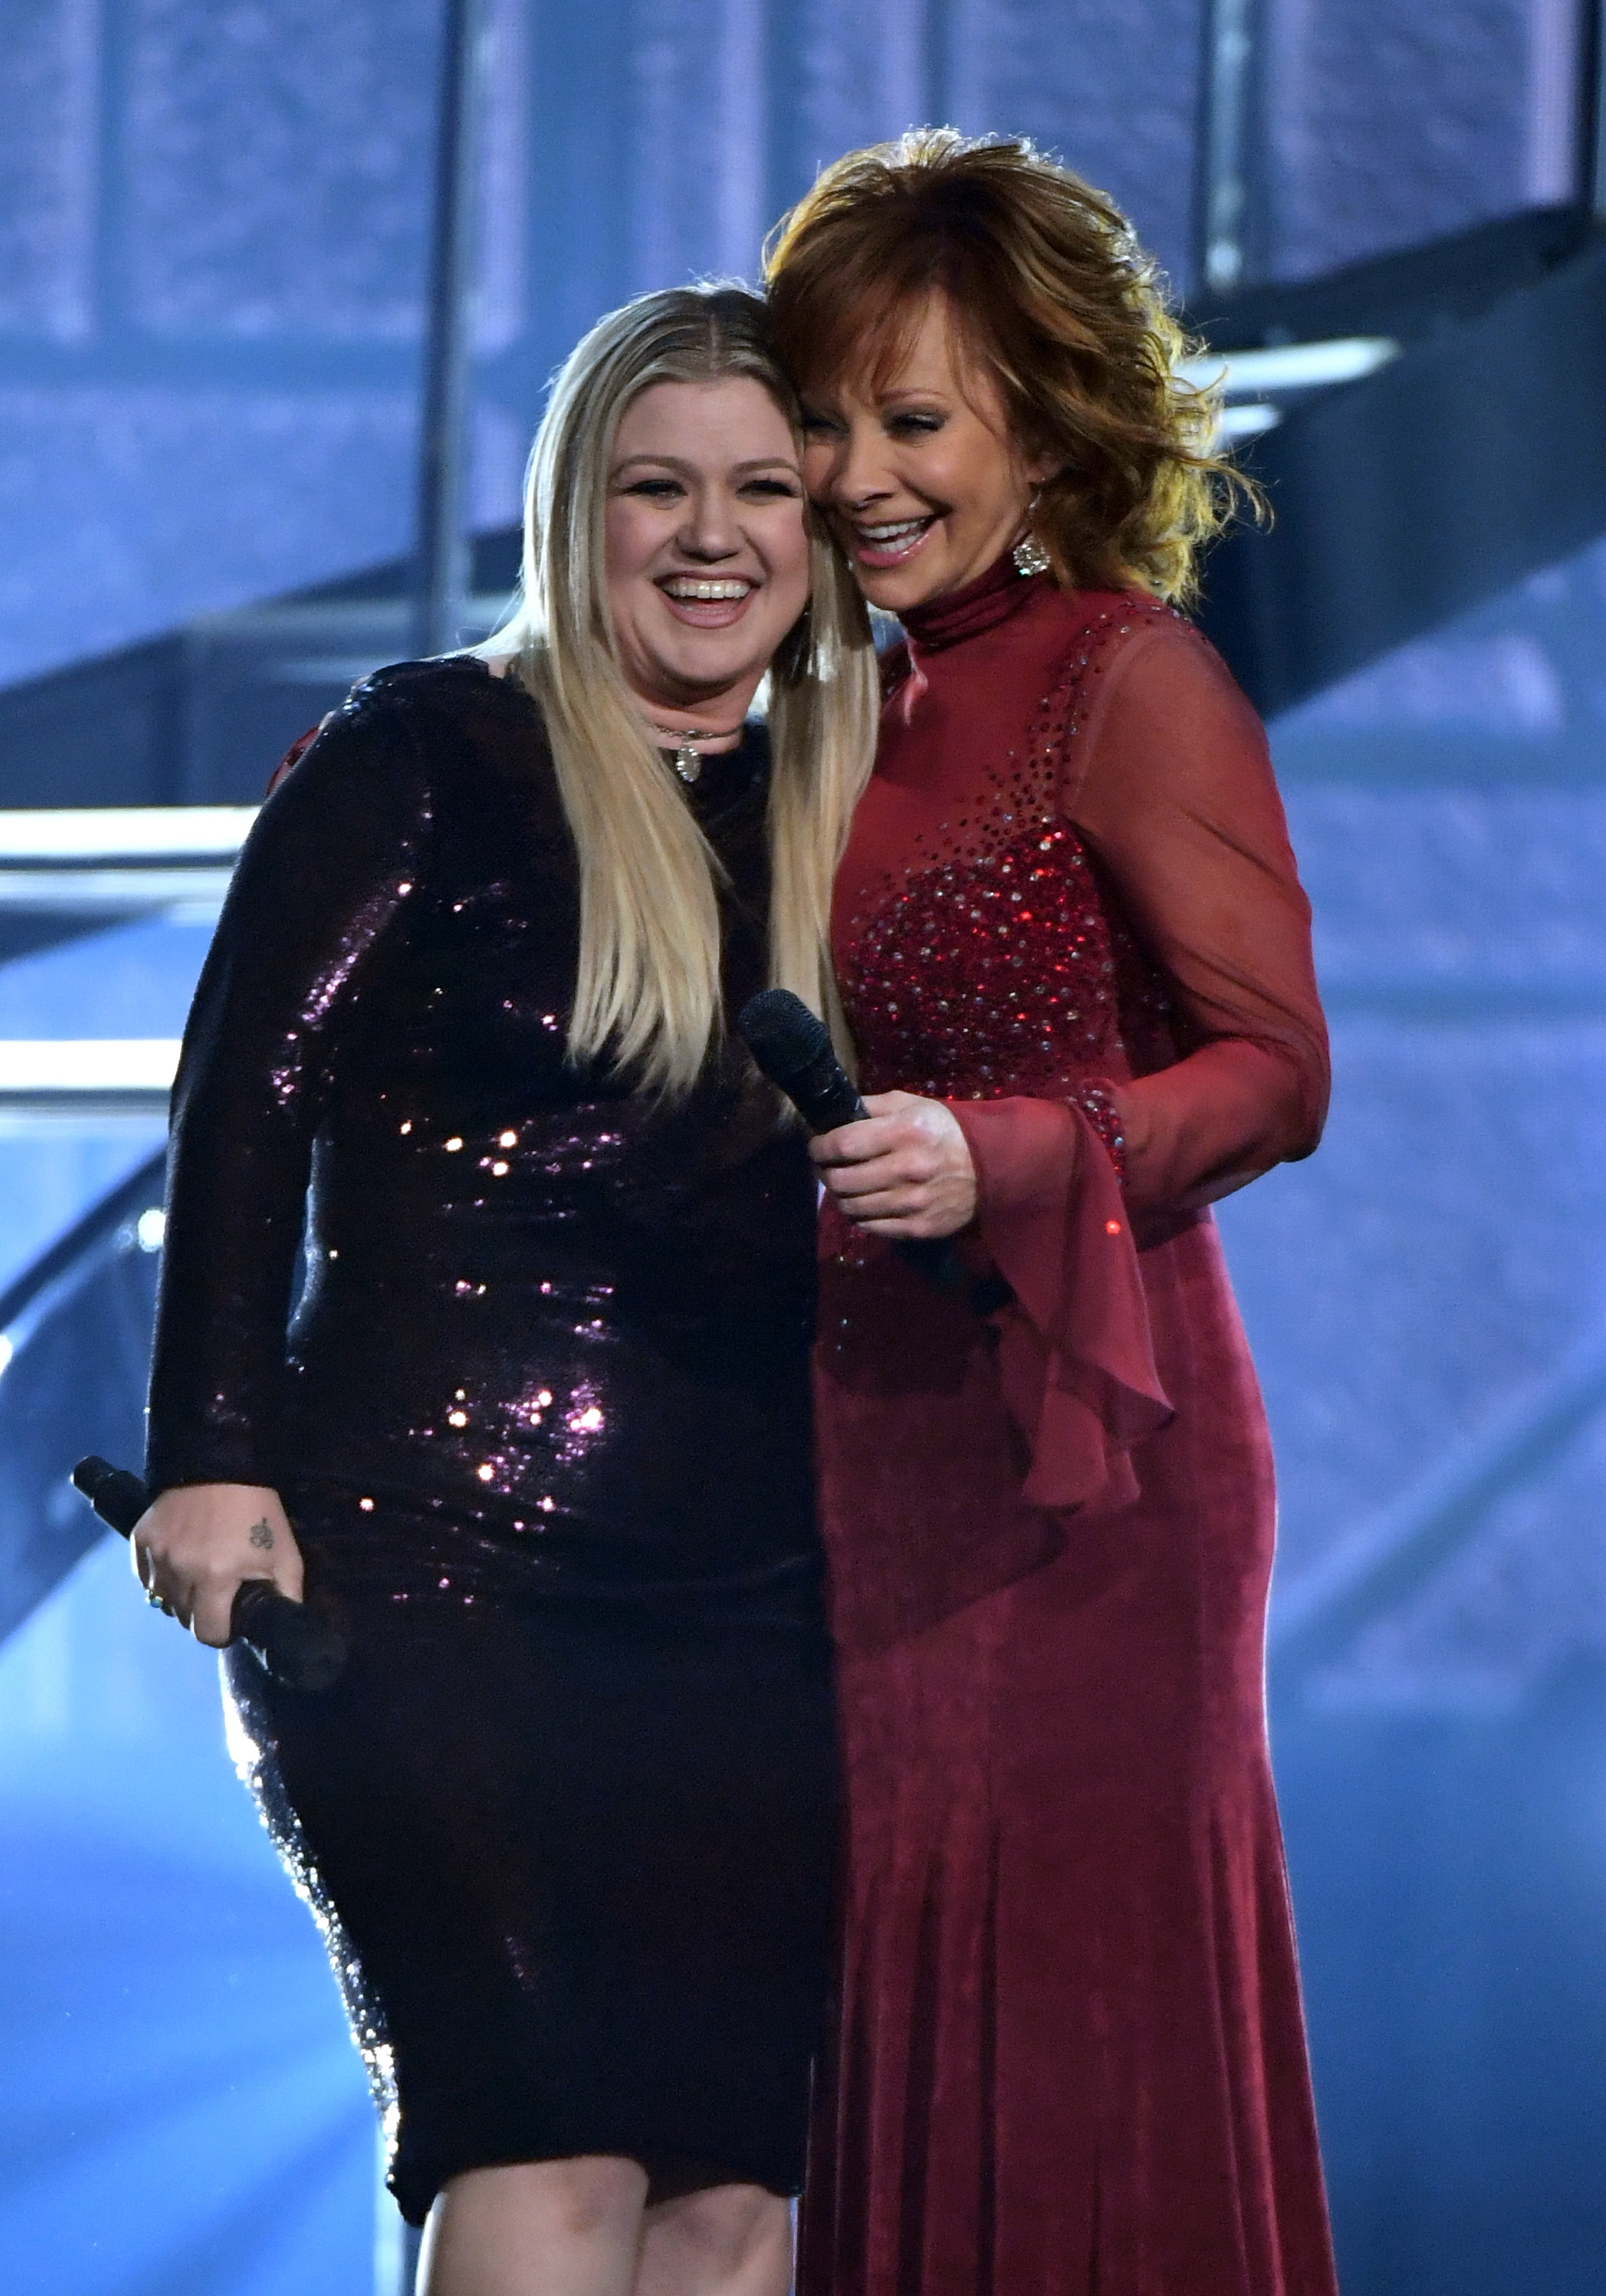 Kelly Clarkson and Reba McEntire at the 53rd Academy Of Country Music Awards | Source: Getty Images